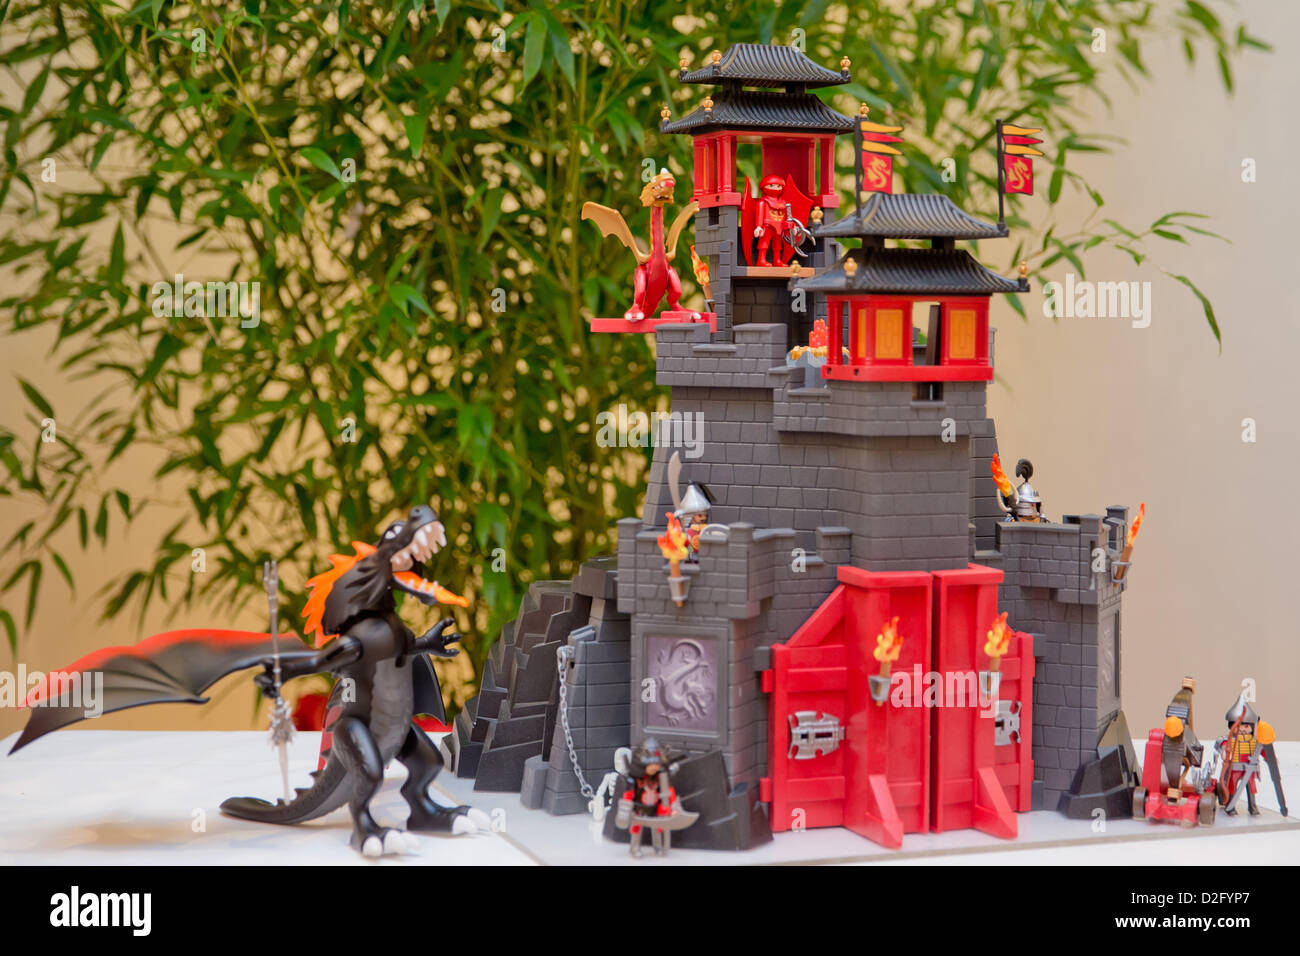 forholdet oversøisk Profet The 'Gigantic Battle Dragon' and 'Secret Dragon Castle' of toy manufacturer  Playmobil are on display at the annual press conference of the professional  association of toy manufacturers idee+spiel in Nuremberg, Germany, 23